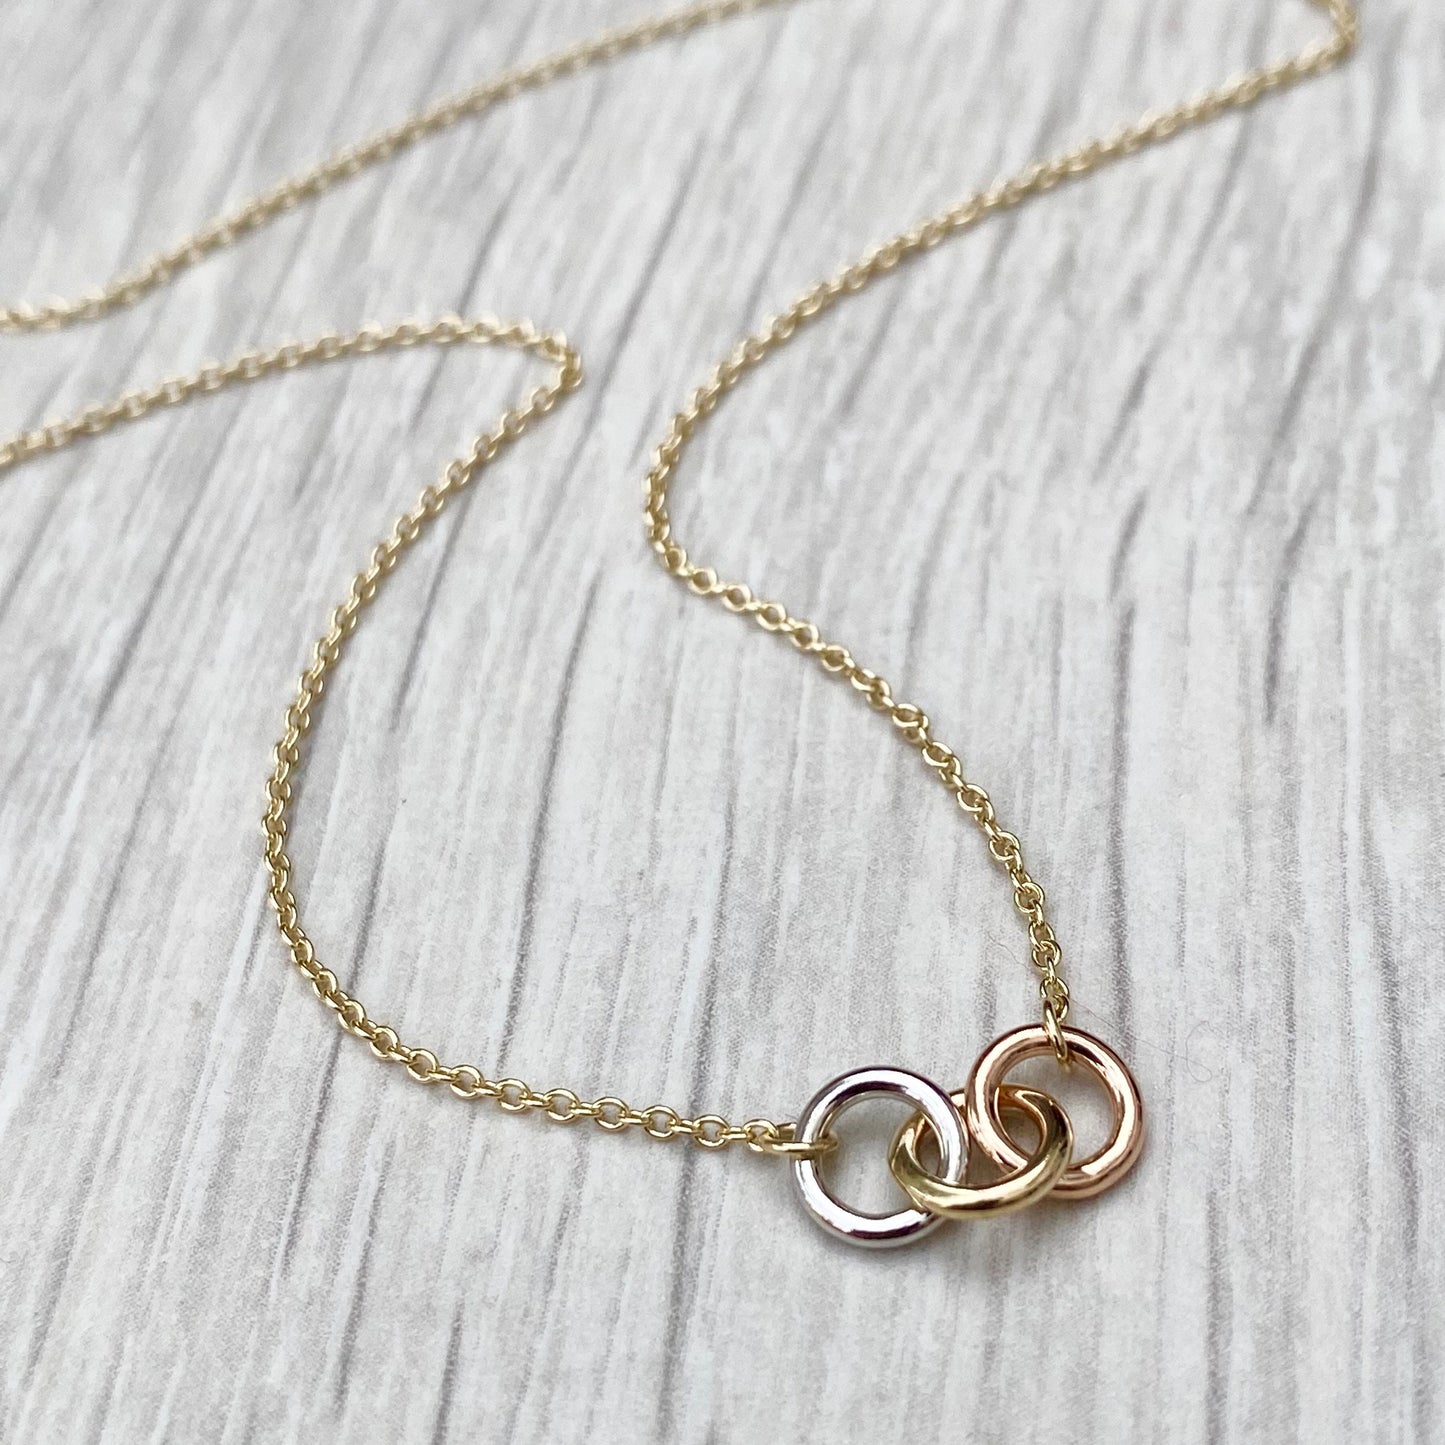 9ct solid yellow, white and rose gold three linked rings necklace with a 9ct yellow gold trace chain